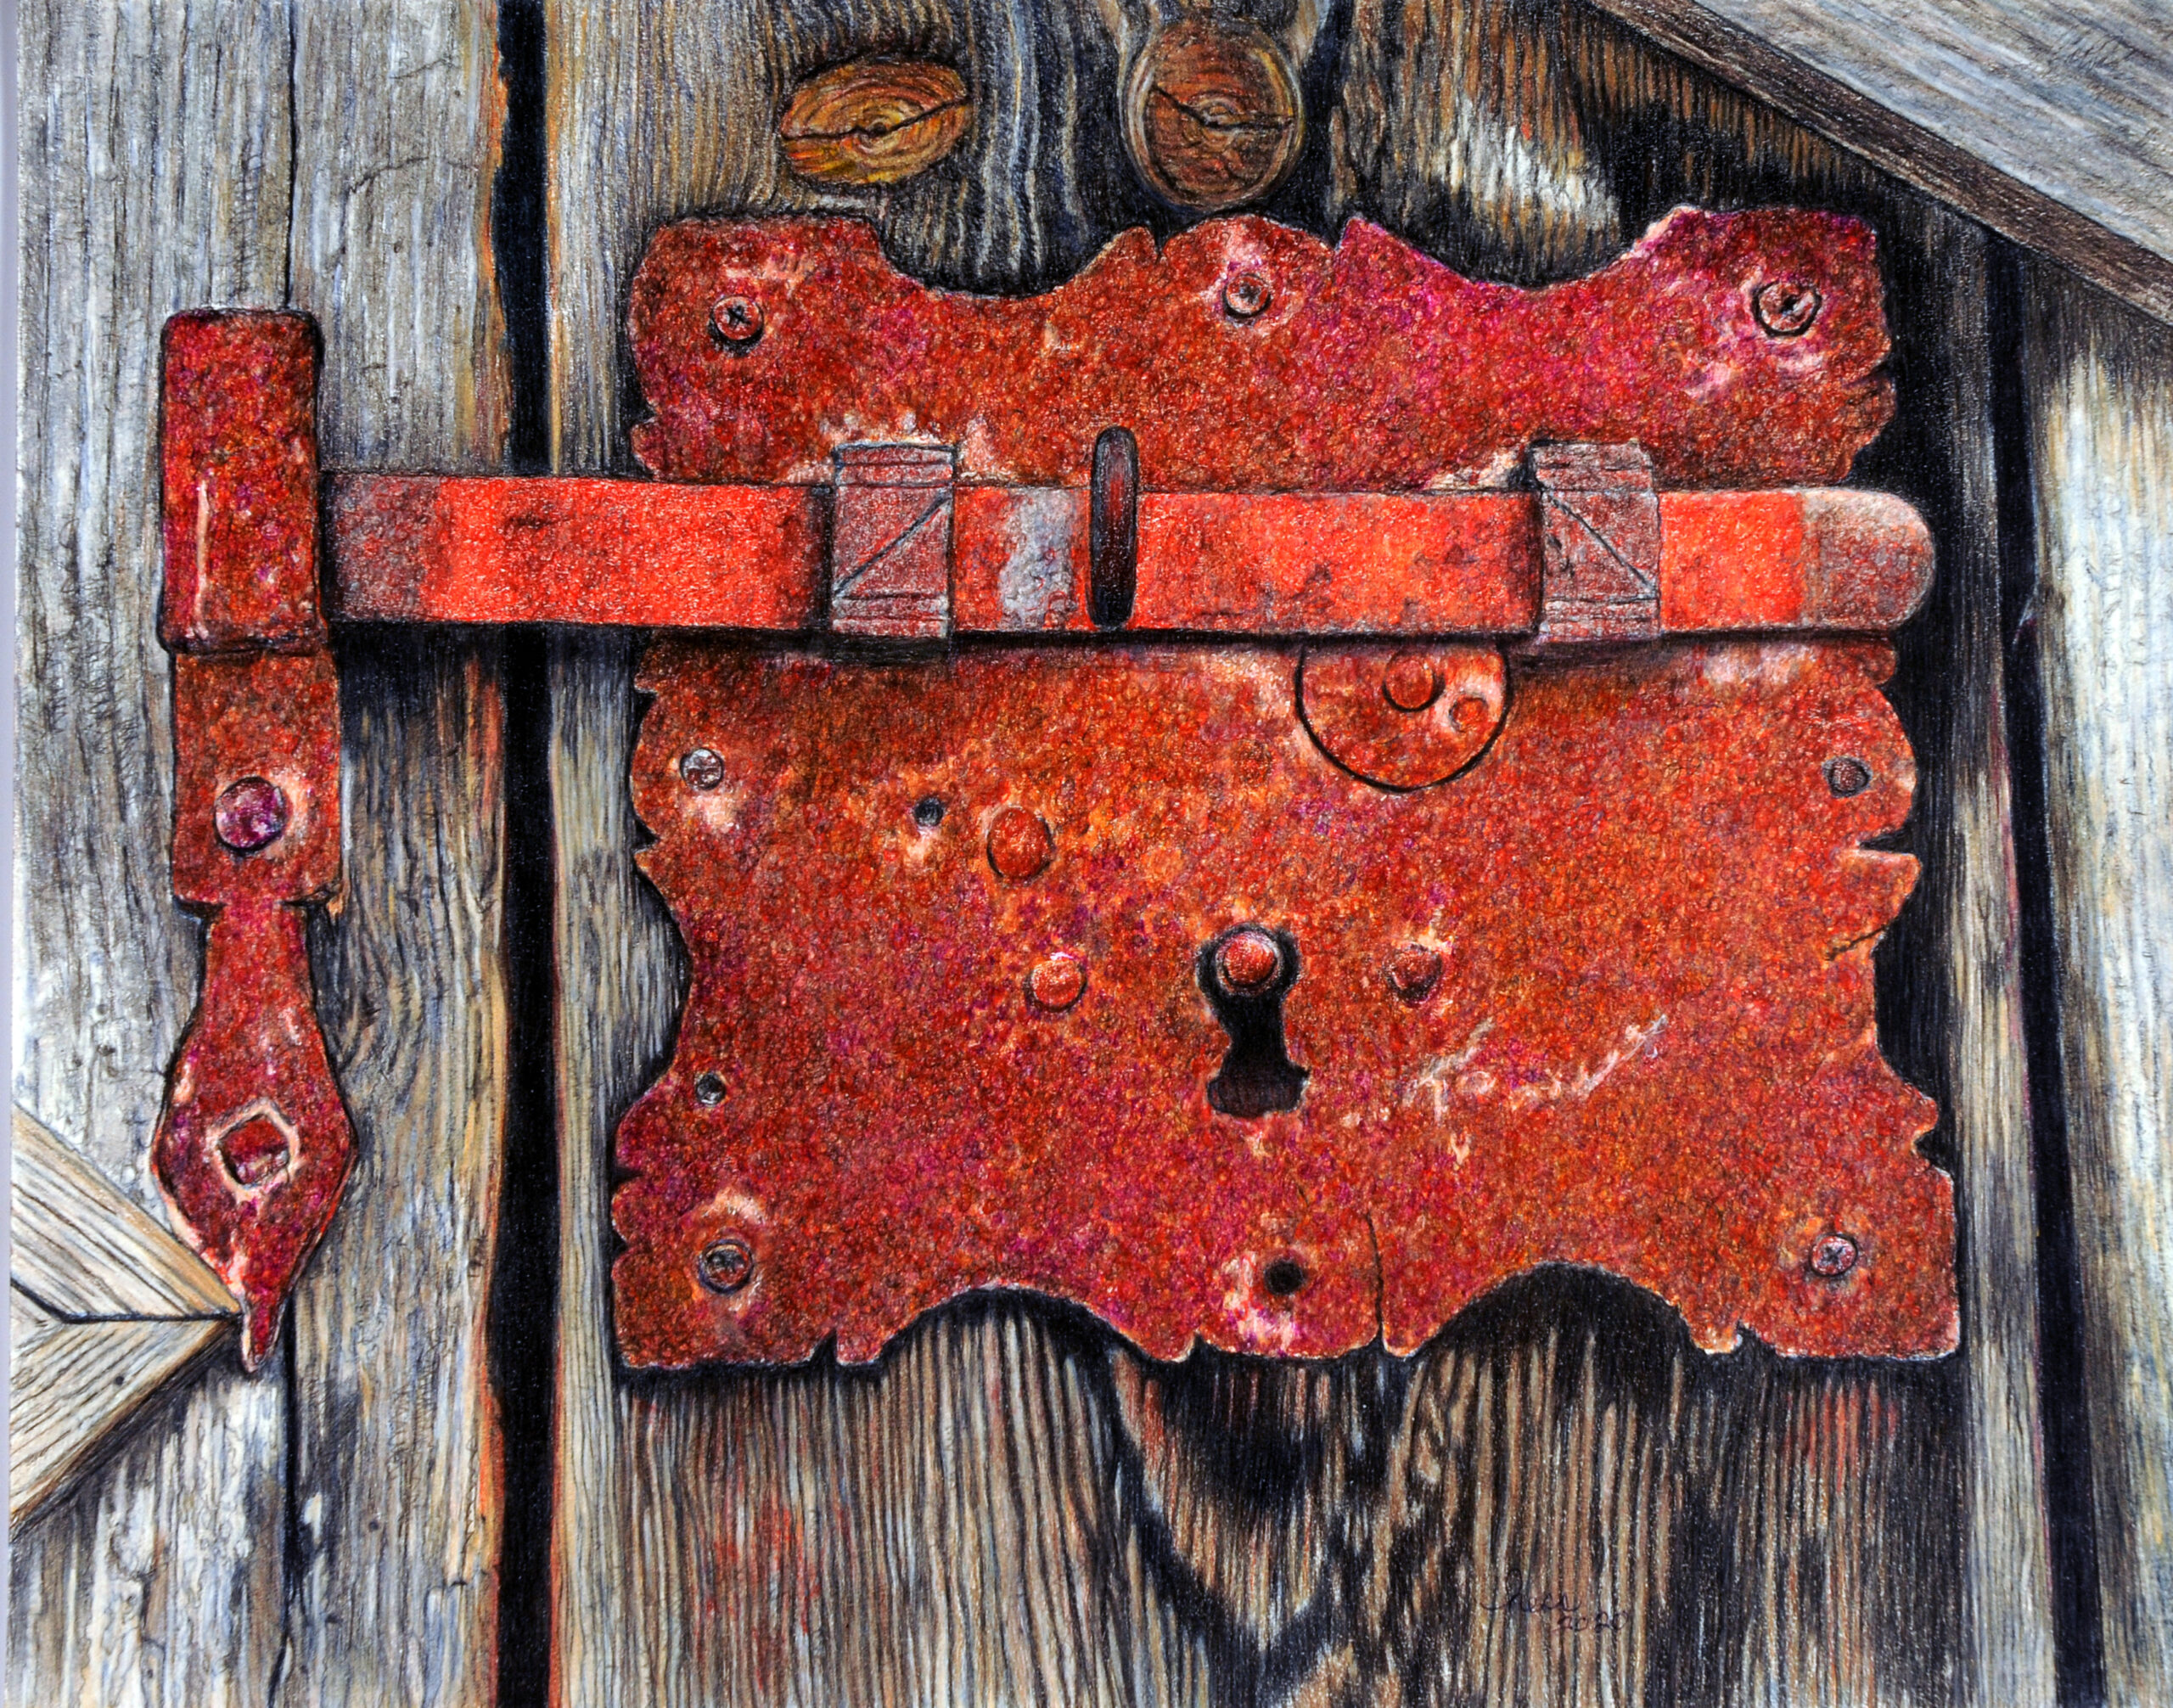 "Rusty Key Latch"
by Barbara Hess, Colored Pencil,
Best of Show 2021